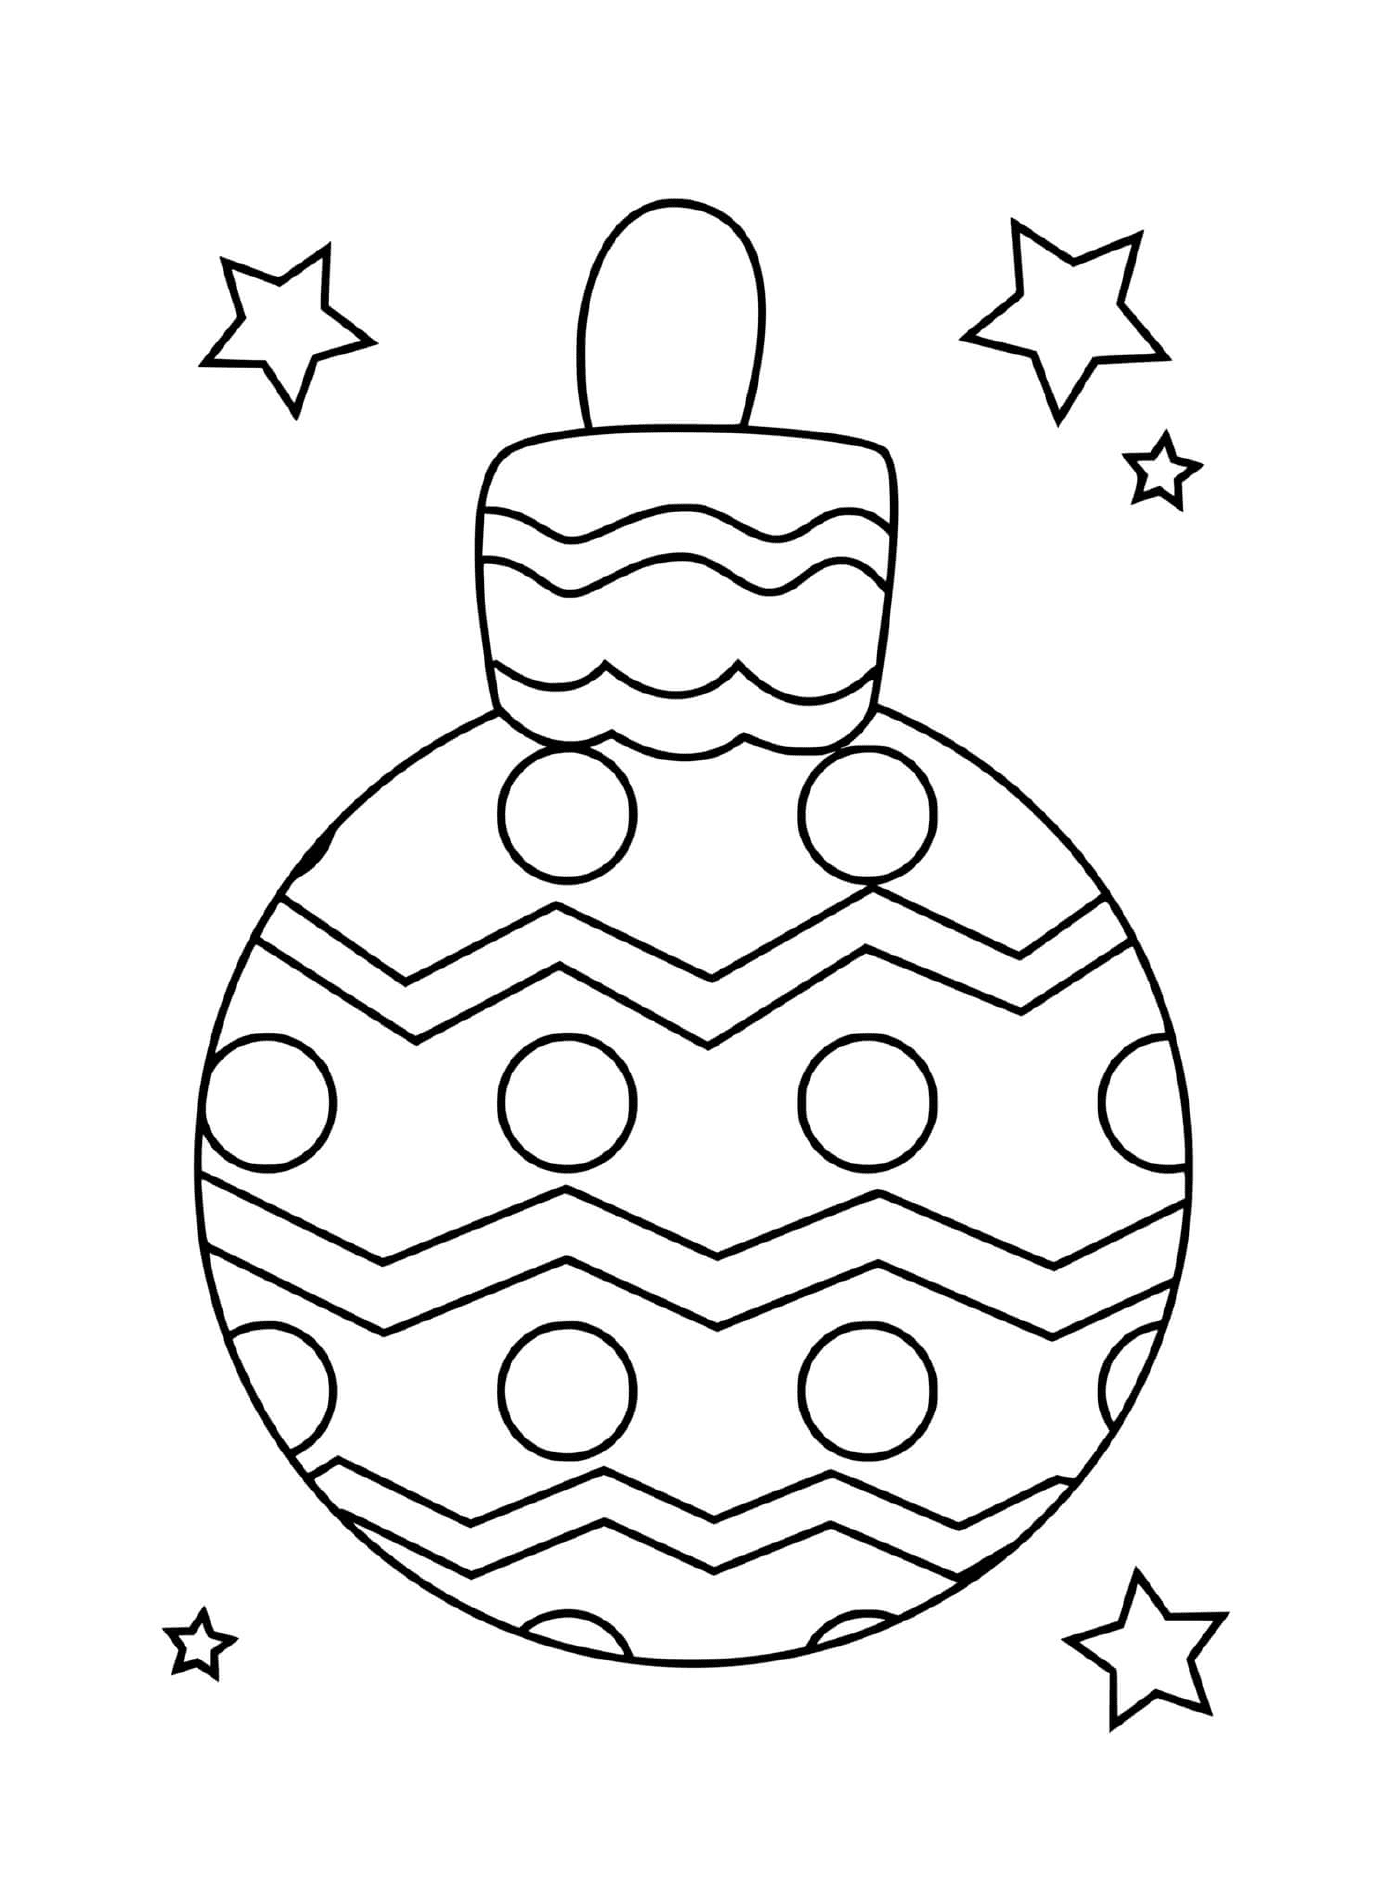  A simple Christmas ball with circles and zigzags 